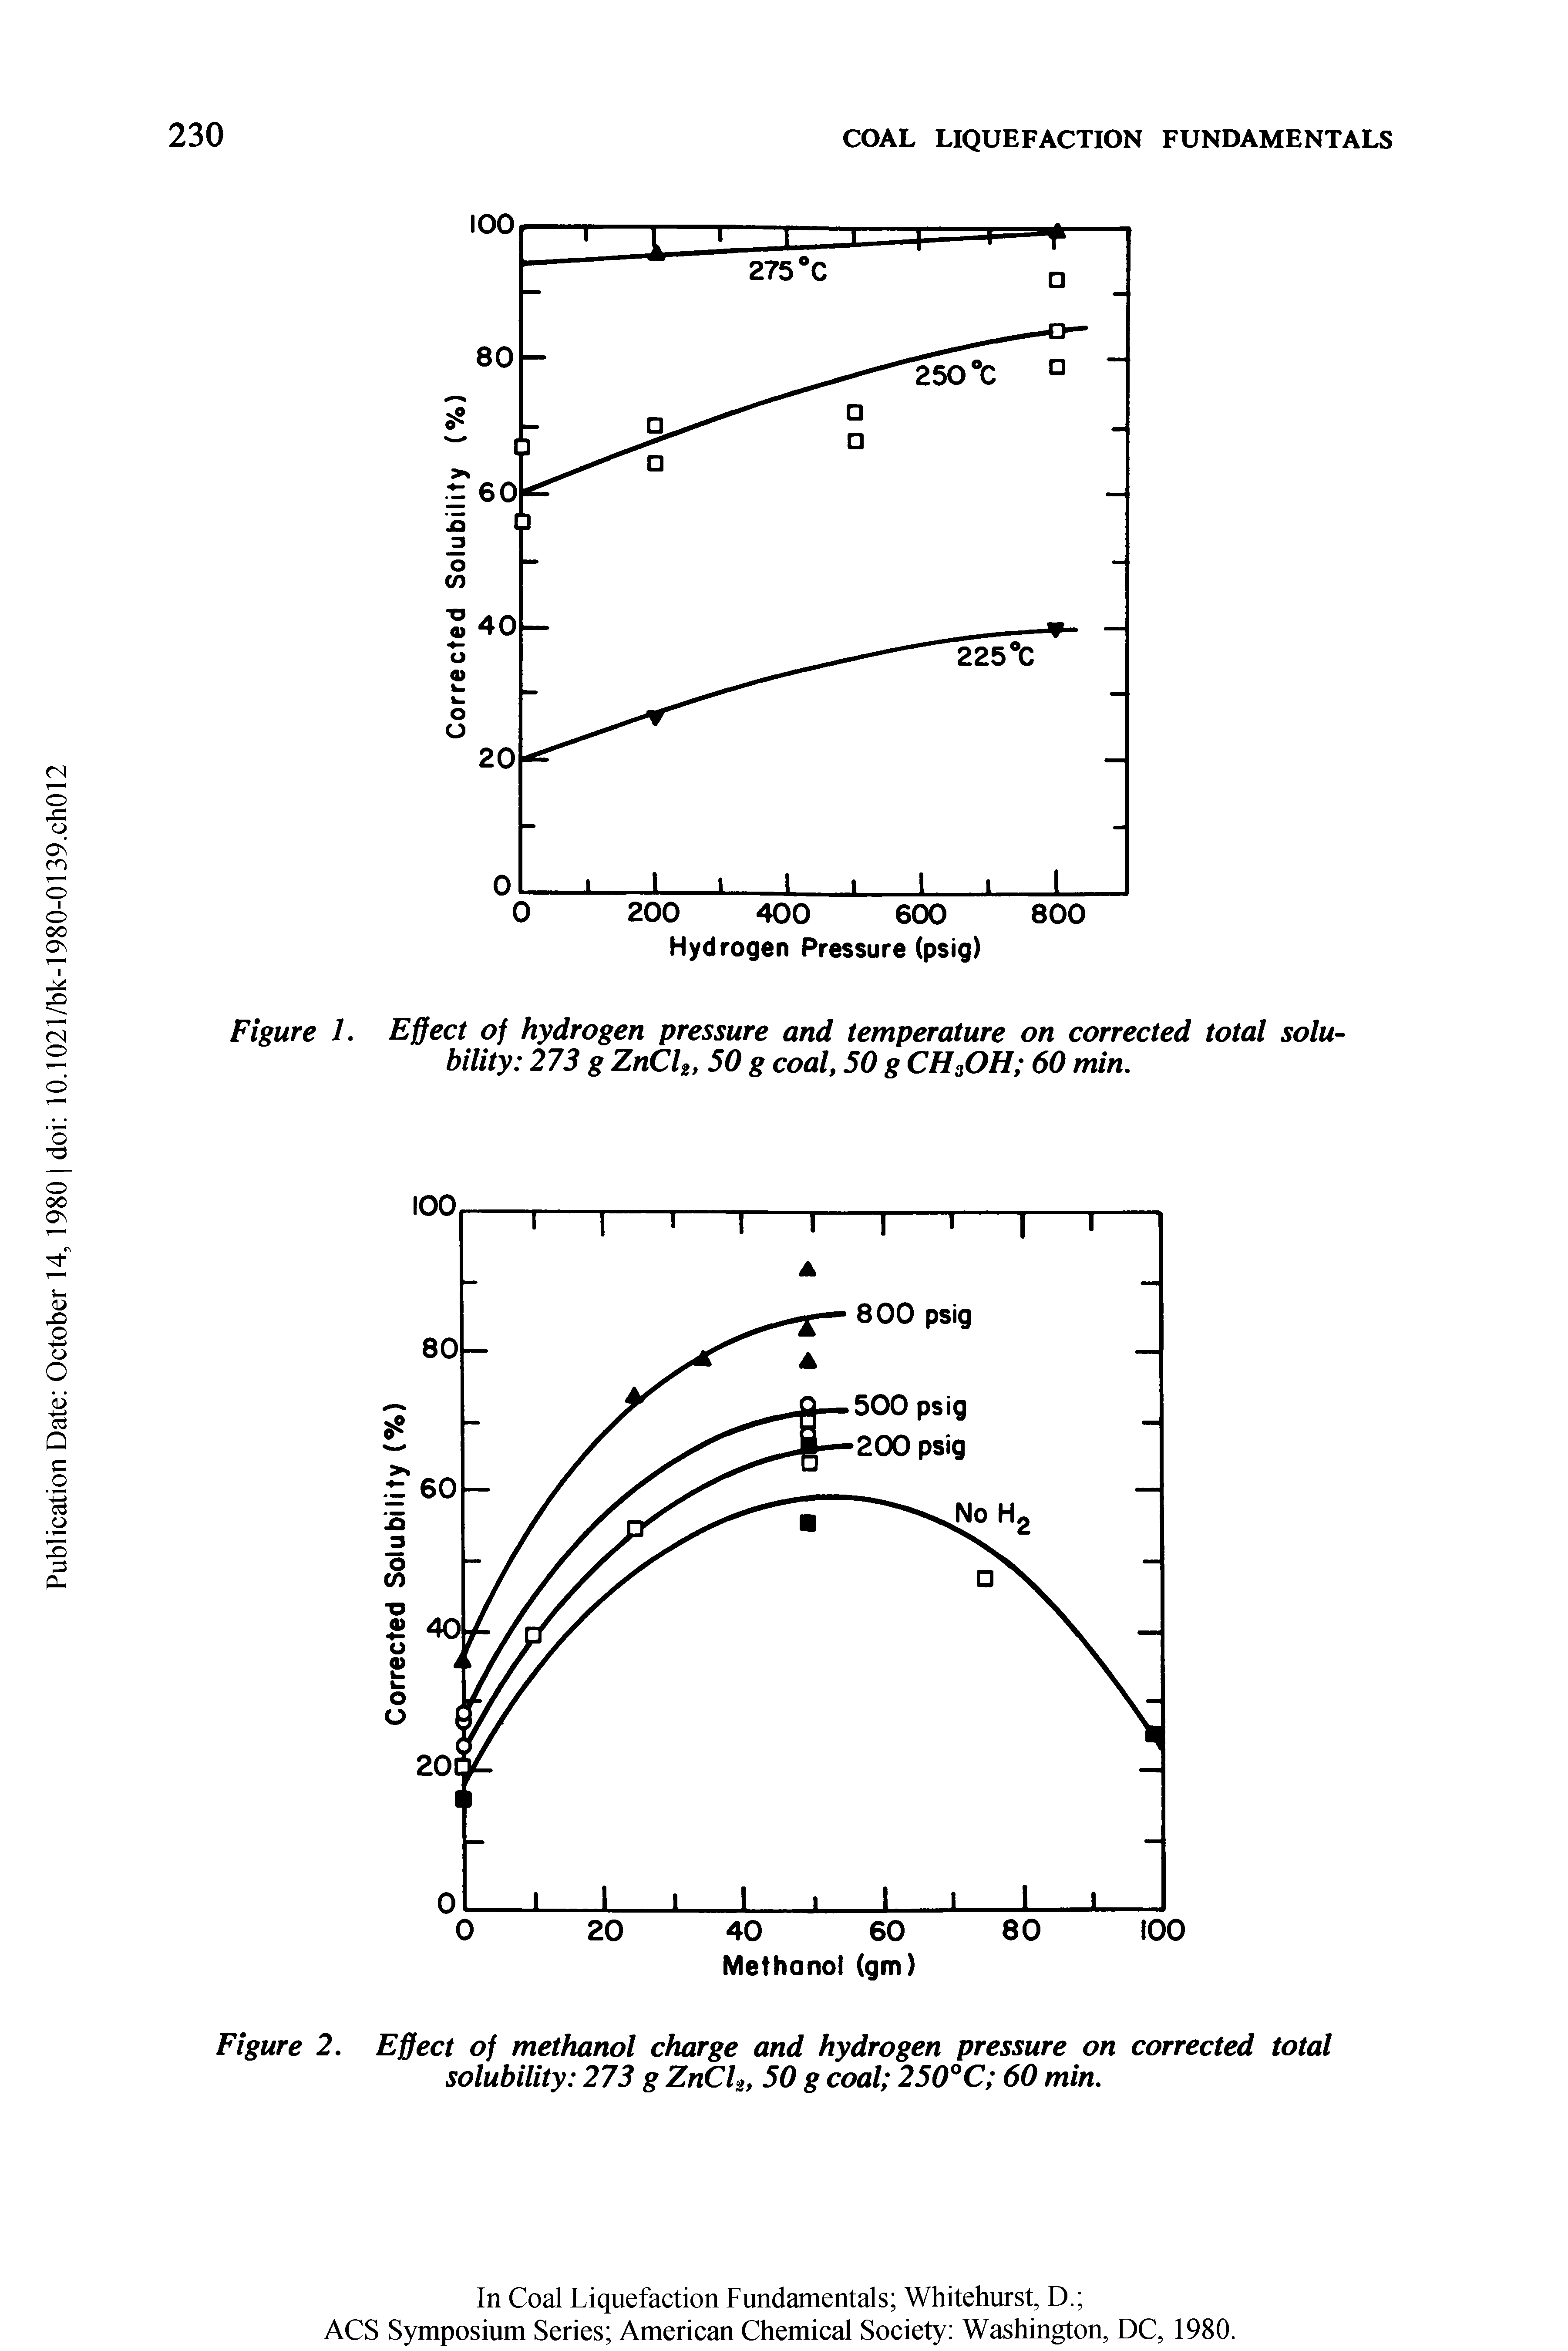 Figure 2. Effect of methanol charge and hydrogen pressure on corrected total solubility 273 g ZnCl, 50 g coal 250°C 60 min.